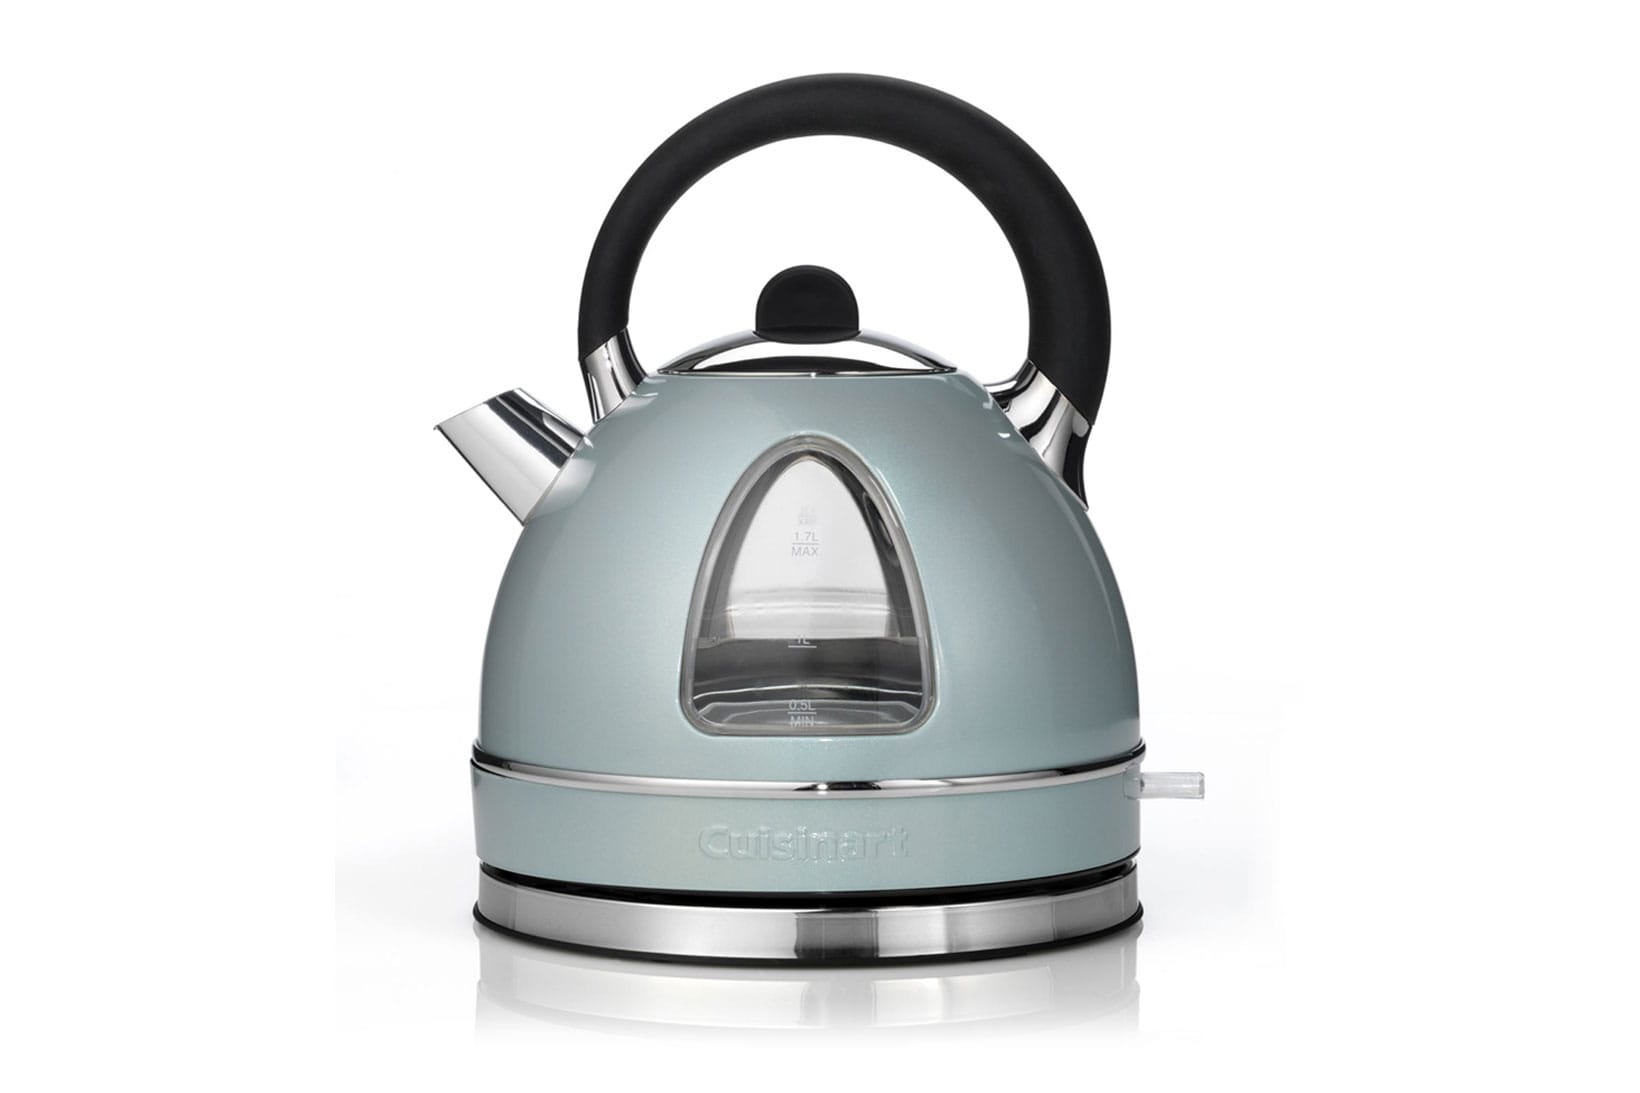 stylish kettles and toasters